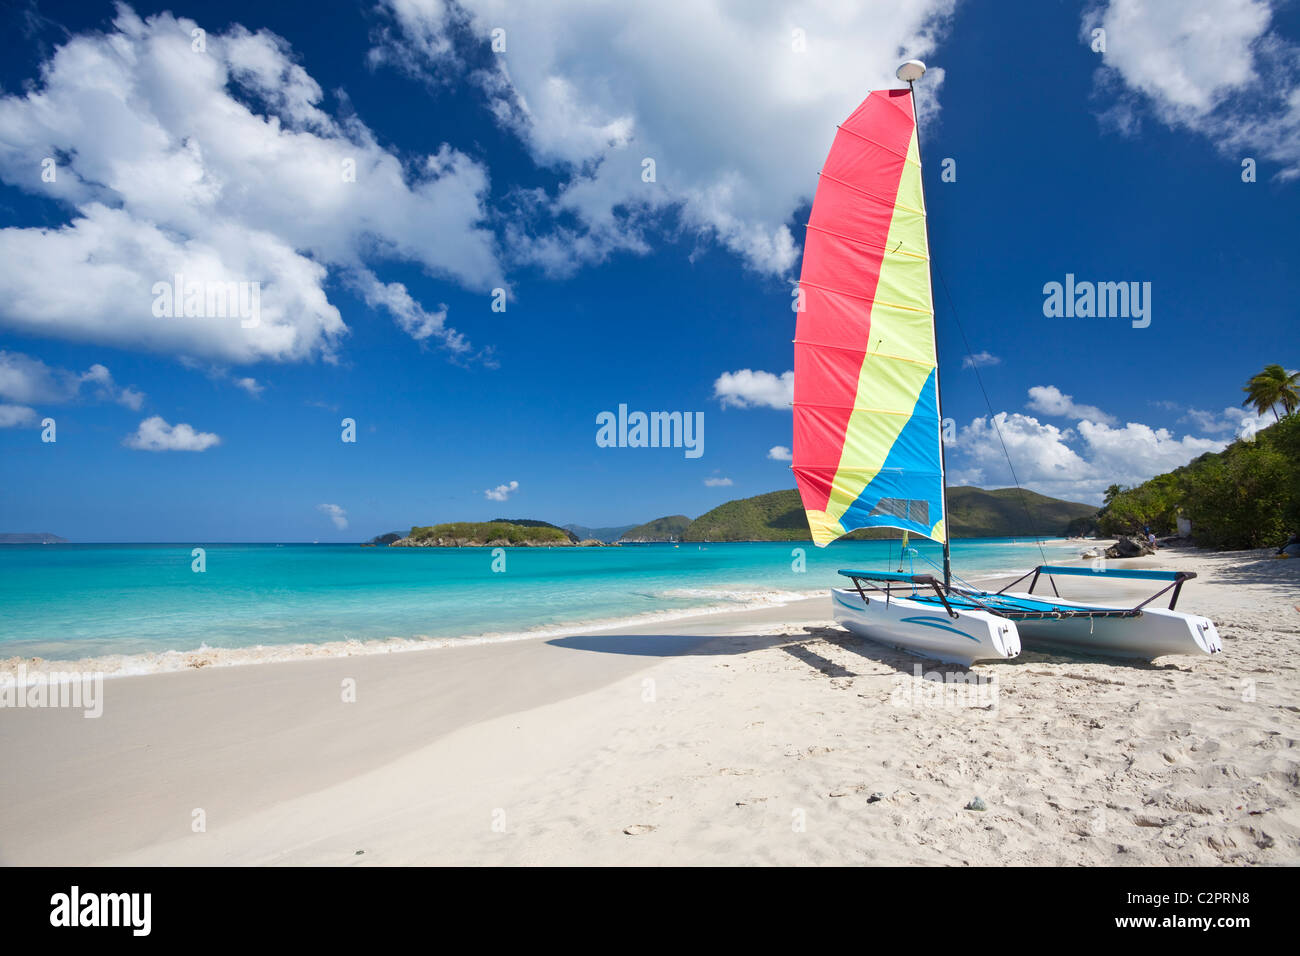 Sail boat on a tropical beach in the US Virgin Islands Stock Photo